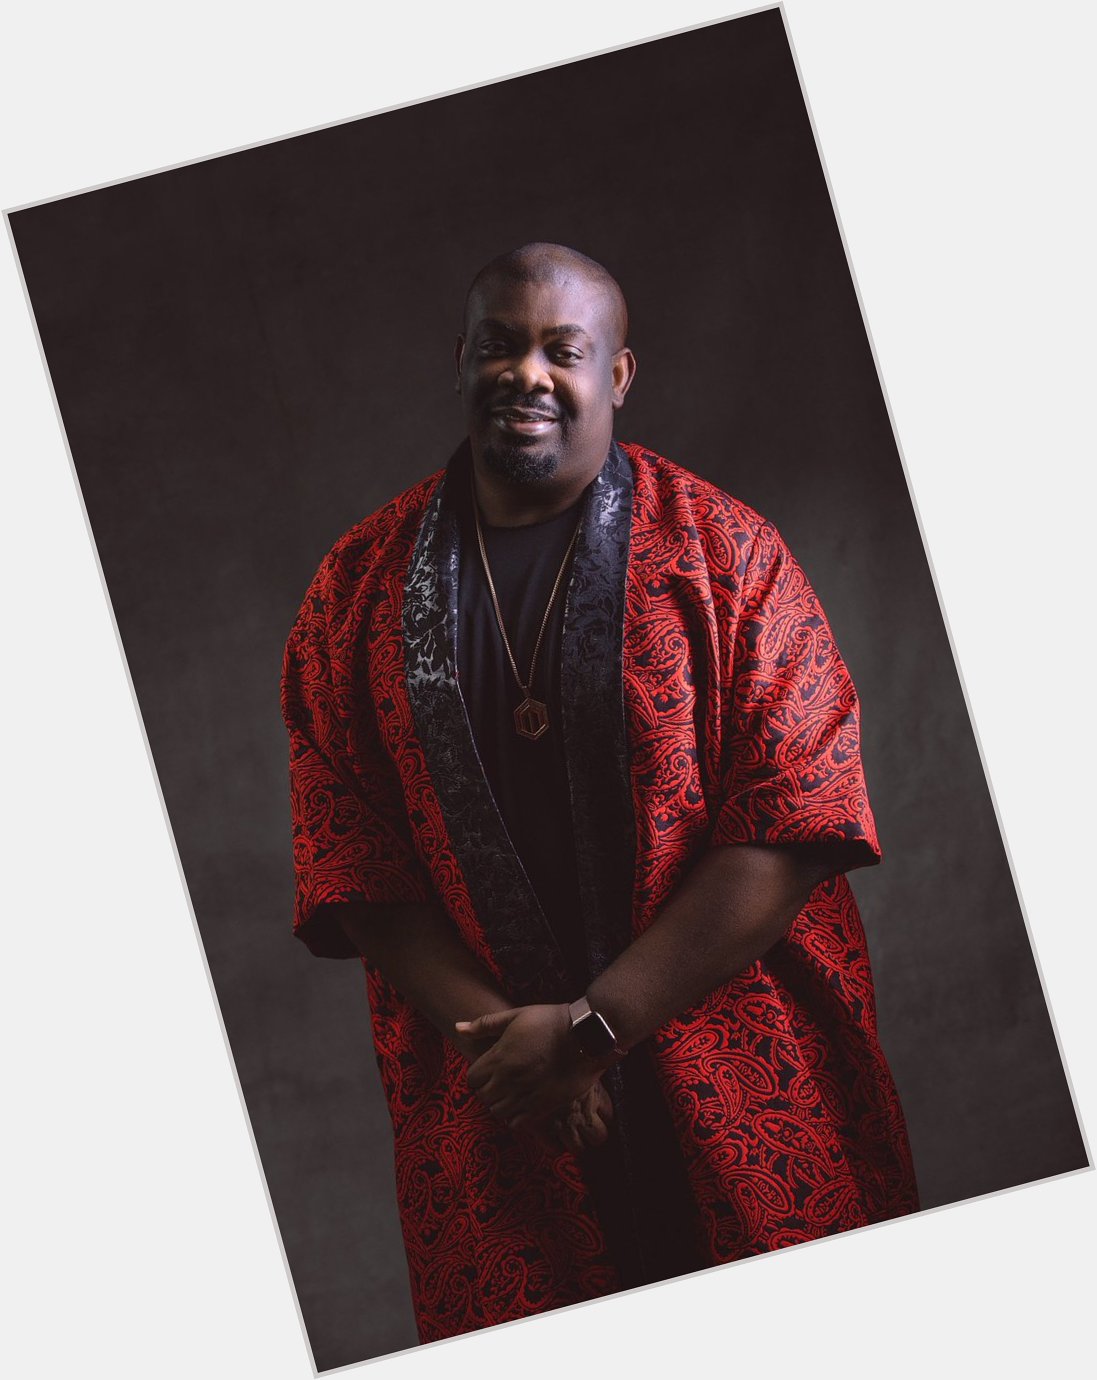 It\s Don Jazzy Again!!!! Happy birthday Sir God bless and keep you 